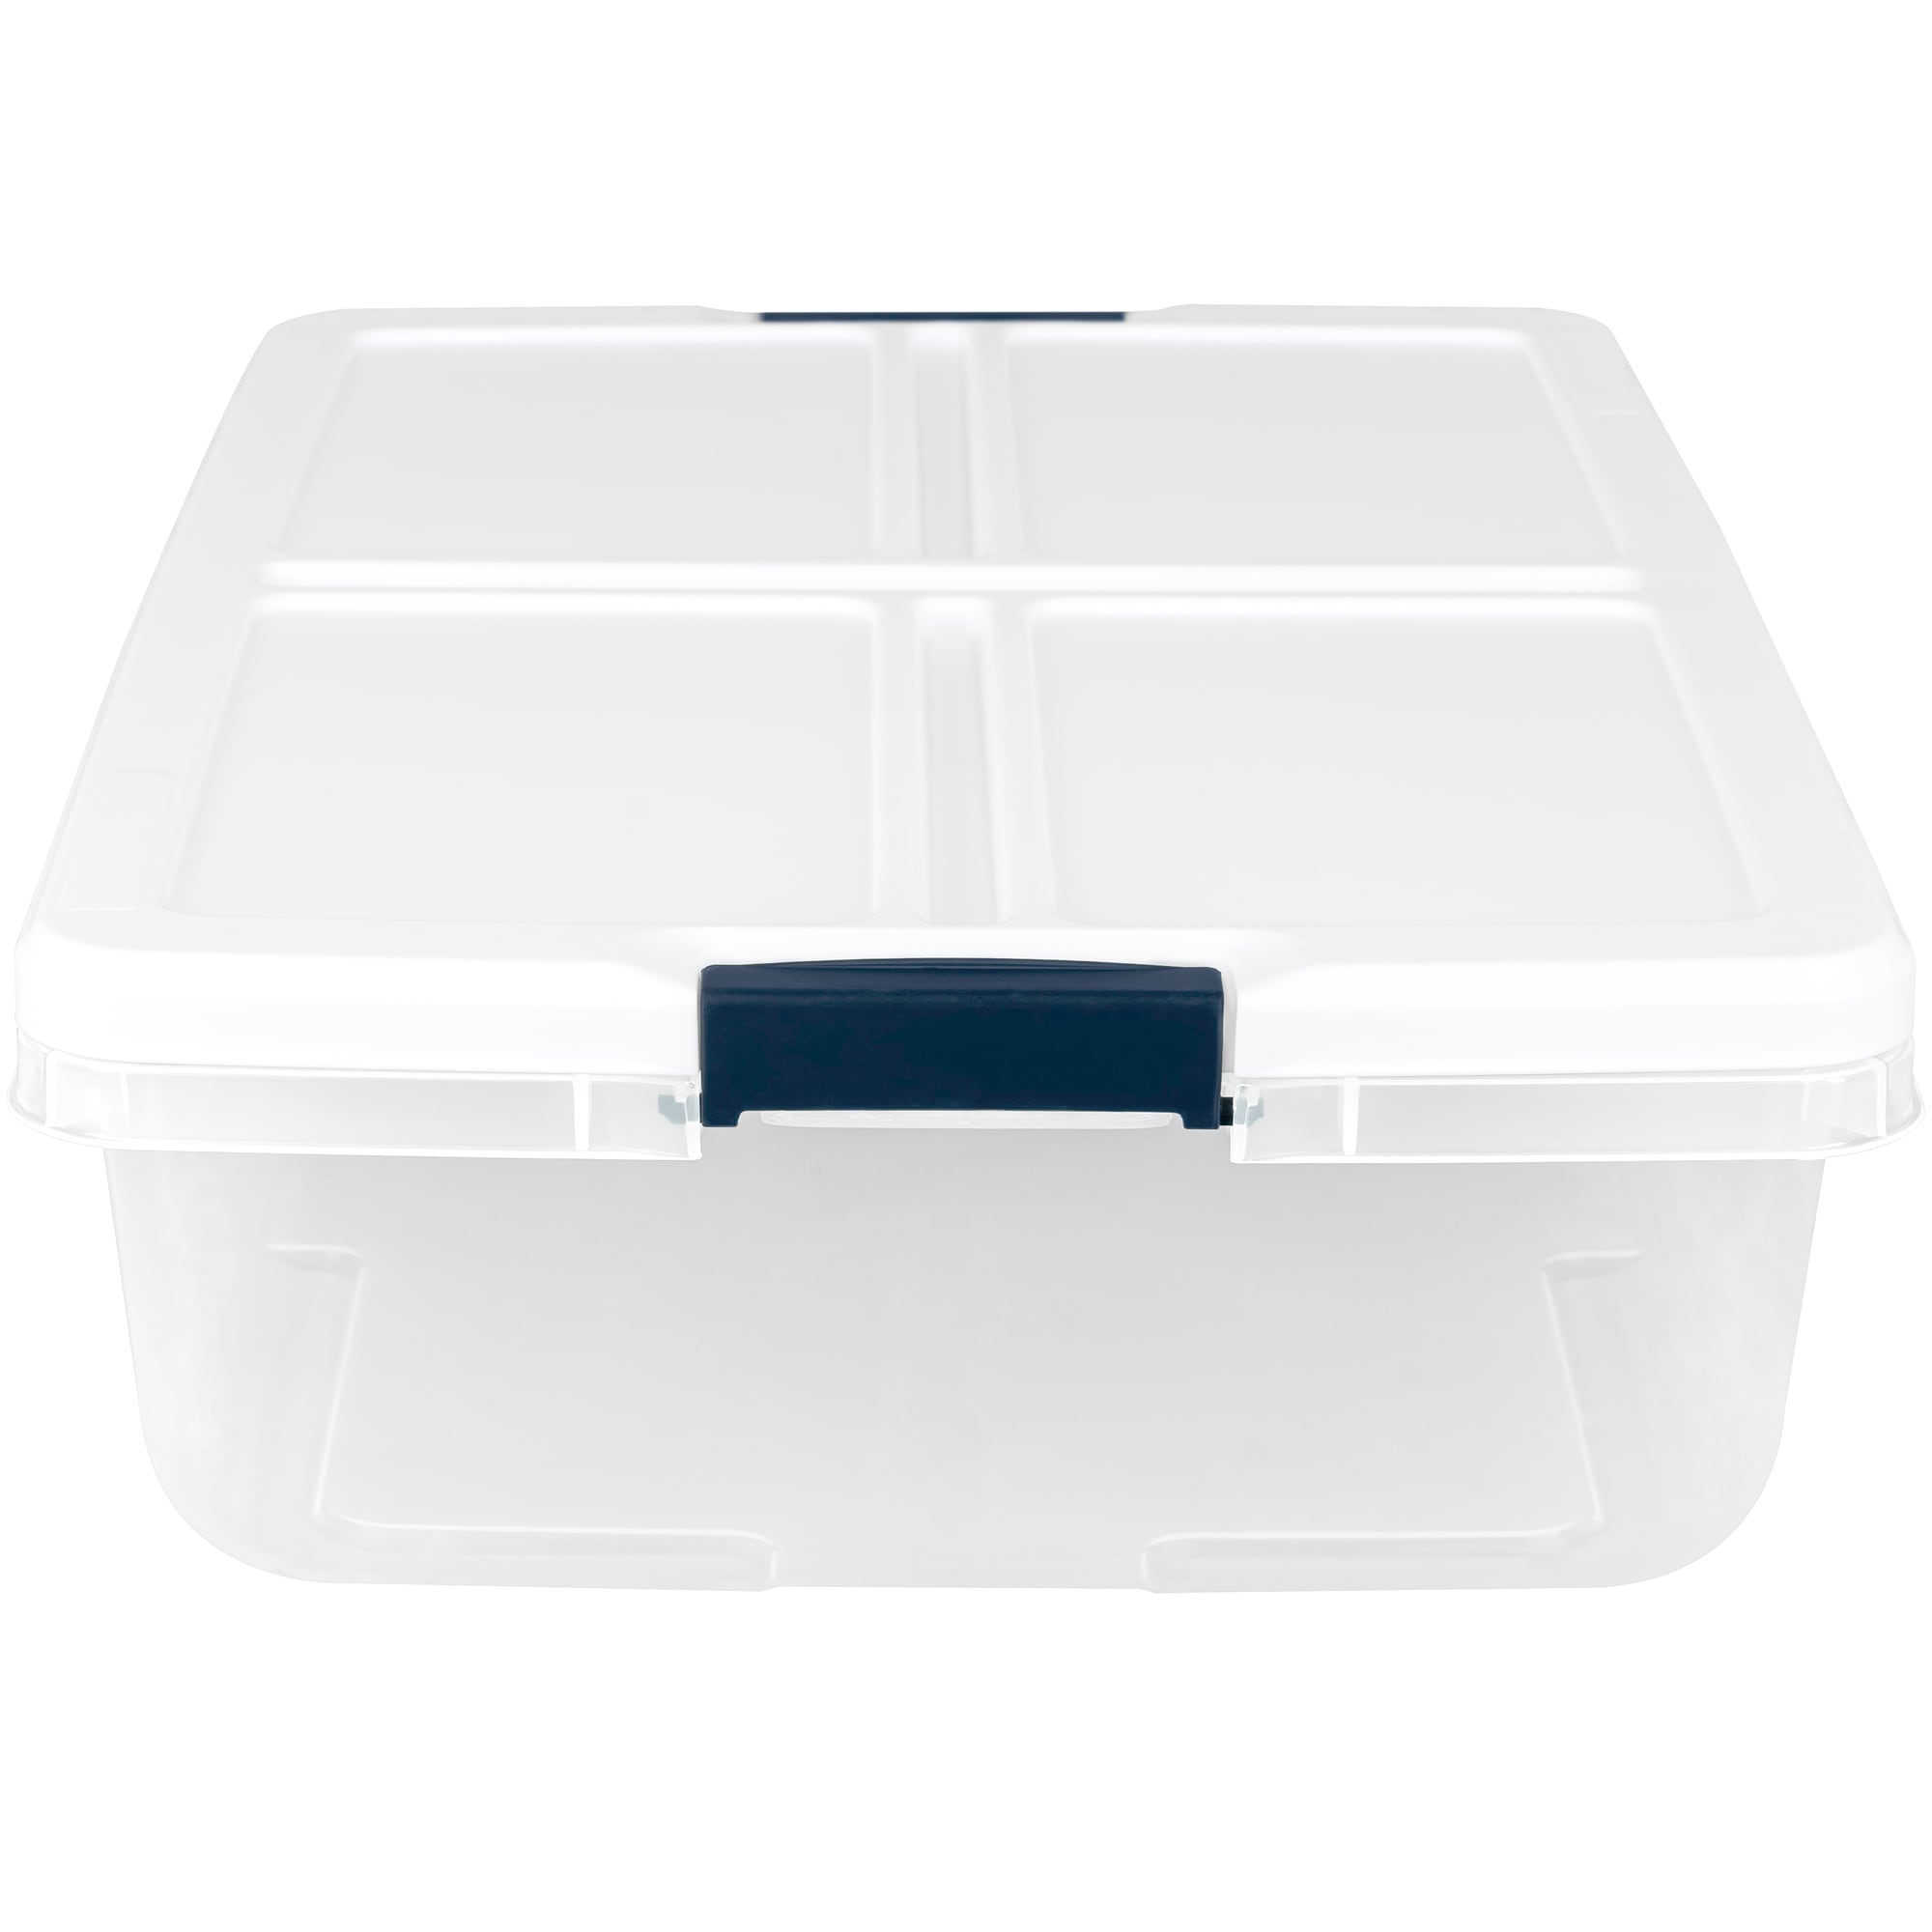 Pekky 34 Quart Clear Storage Bins with Lid, Latching Box Totes (4 Packs)